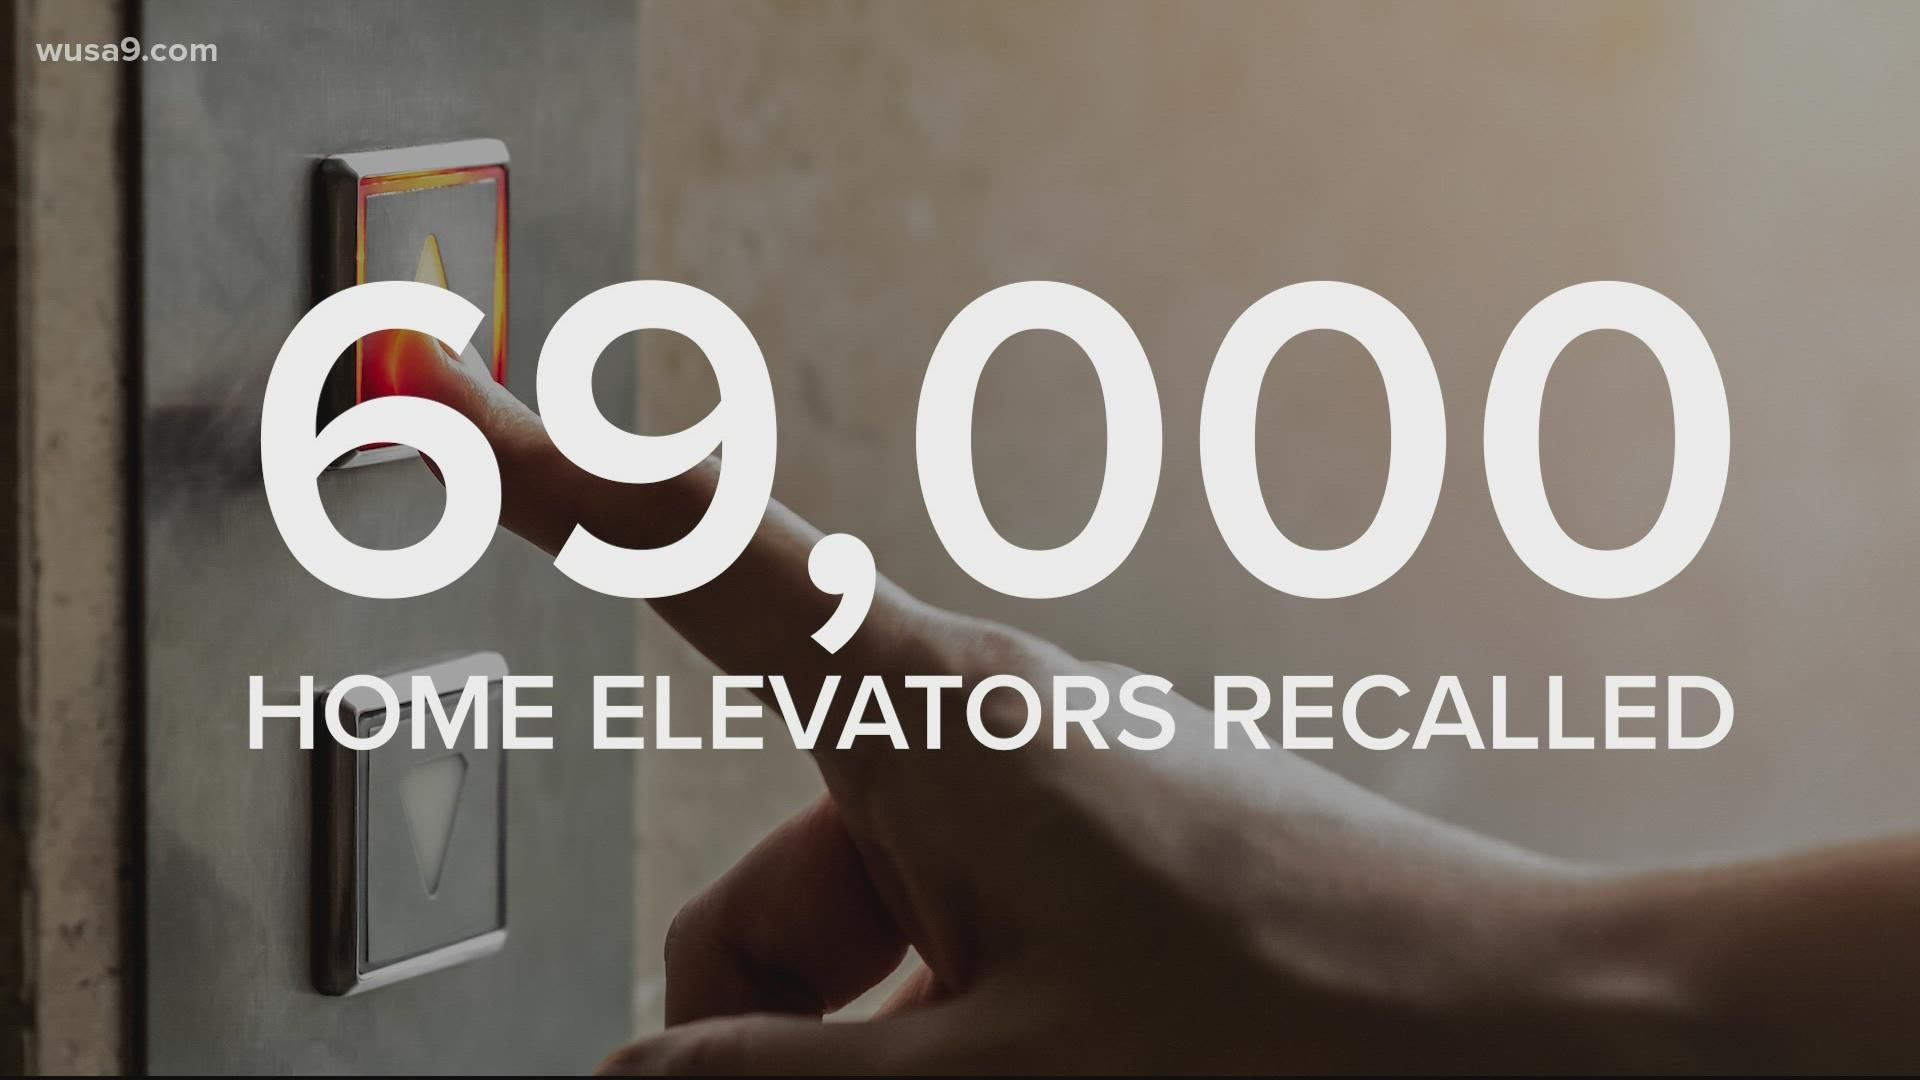 The Consumer Product Safety Commission recalled around 69,000 home elevators Tuesday